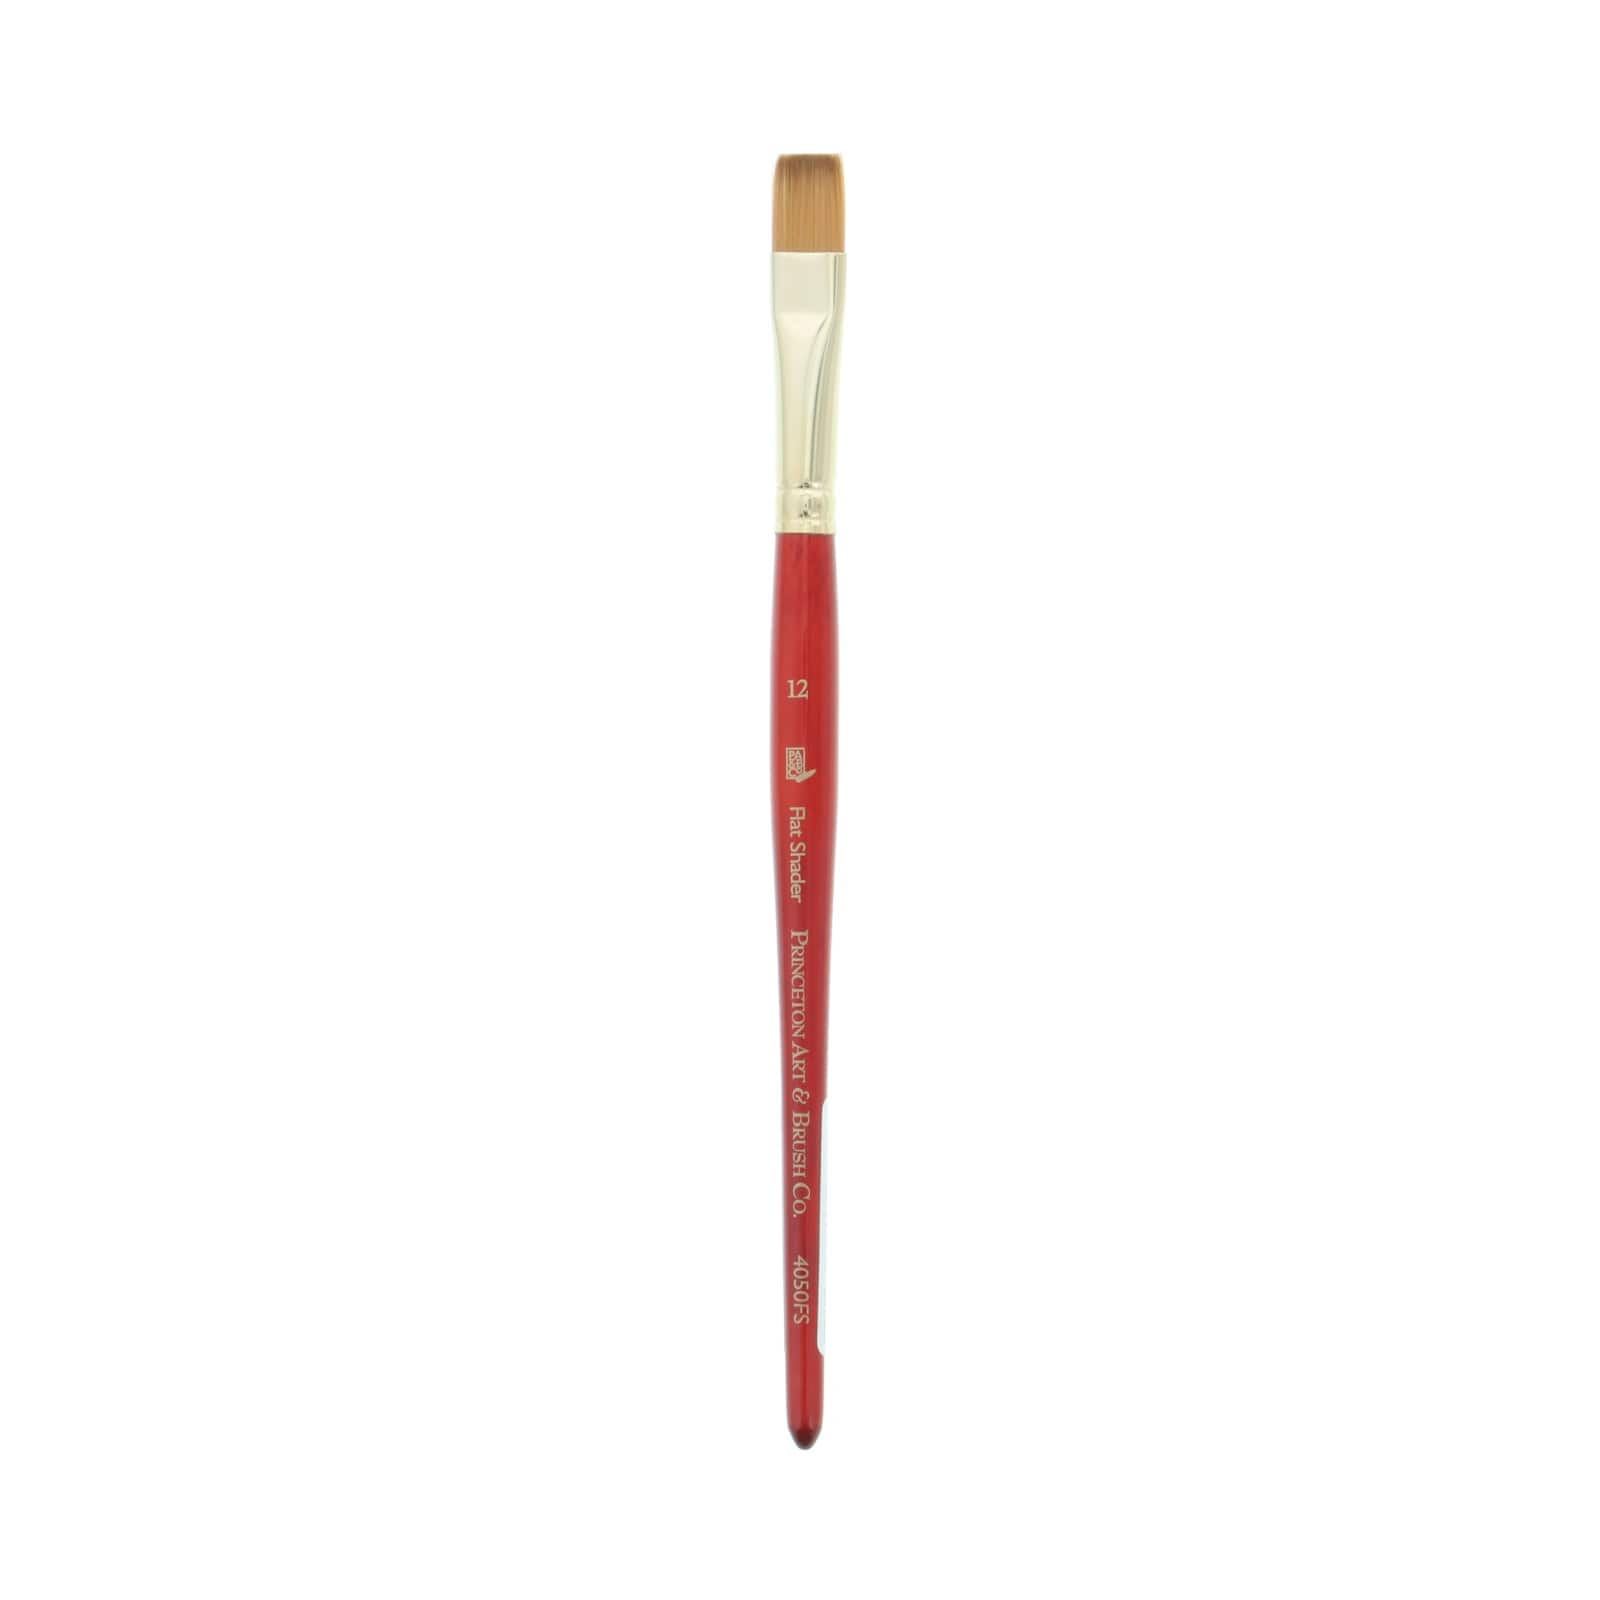 Princeton Heritage, Series 4050, Synthetic Sable Paint Brush for